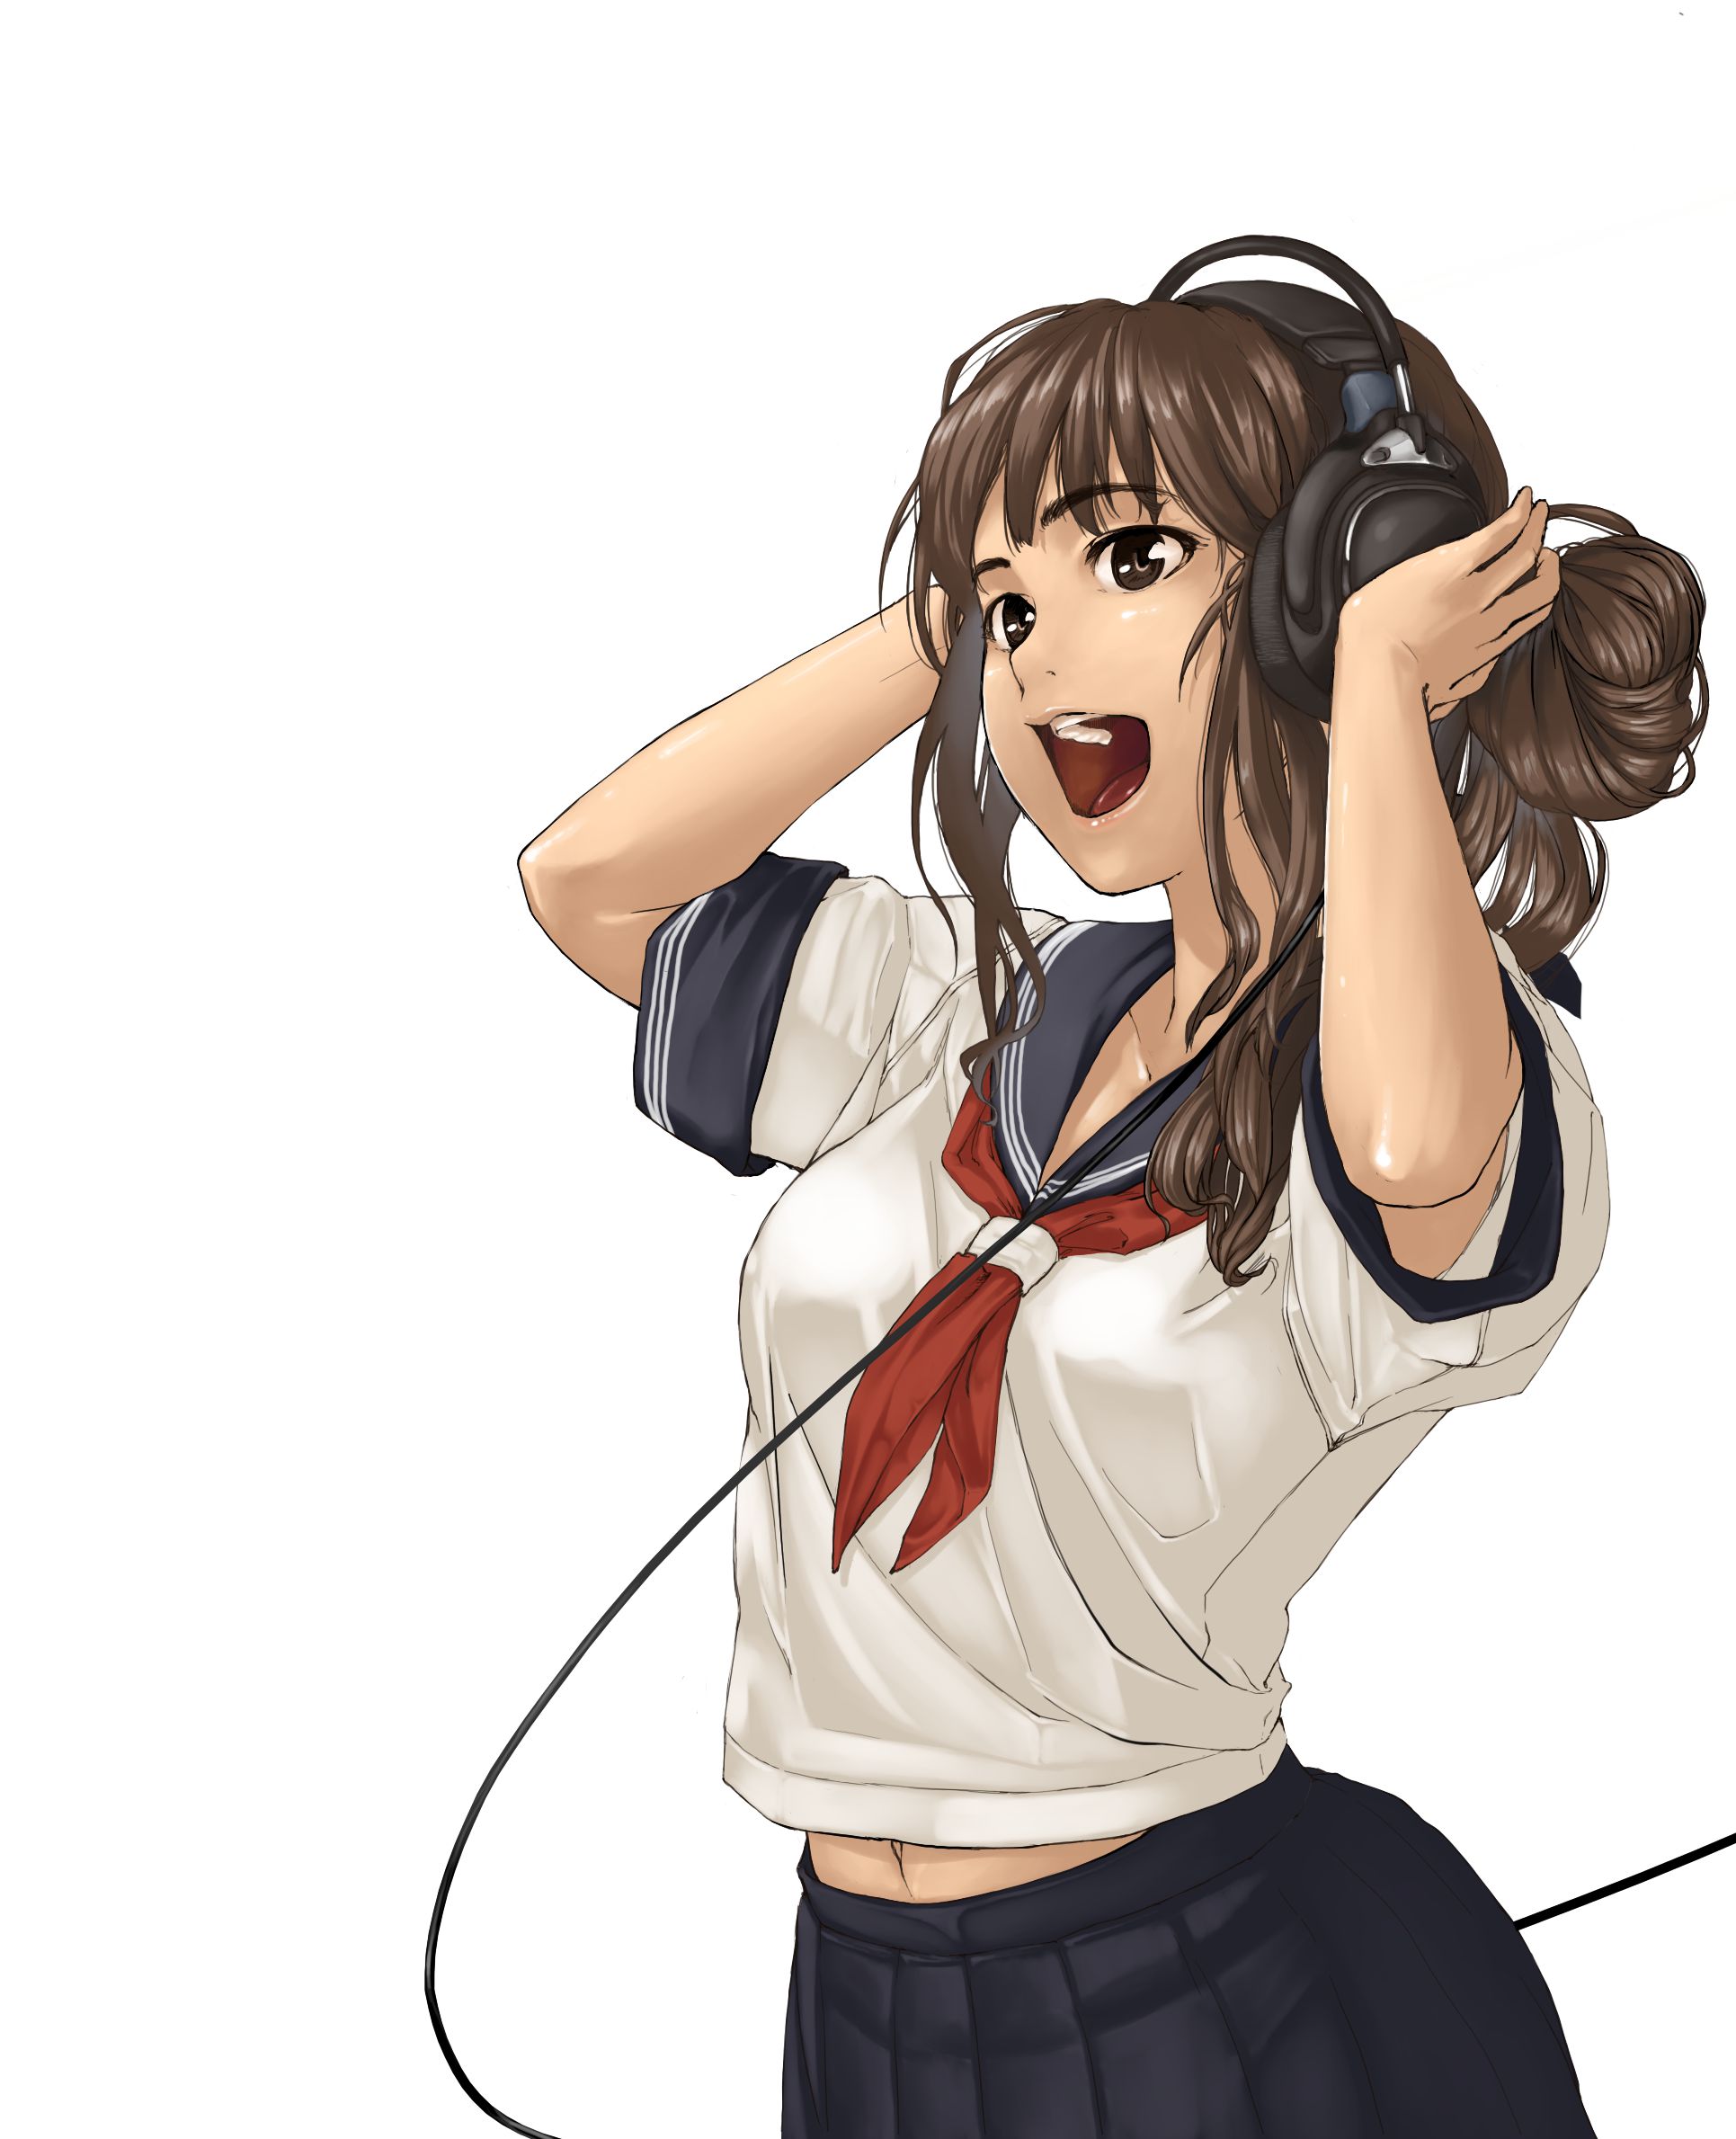 Drew trap picture or headphone girl えろあ. Vol.6 31